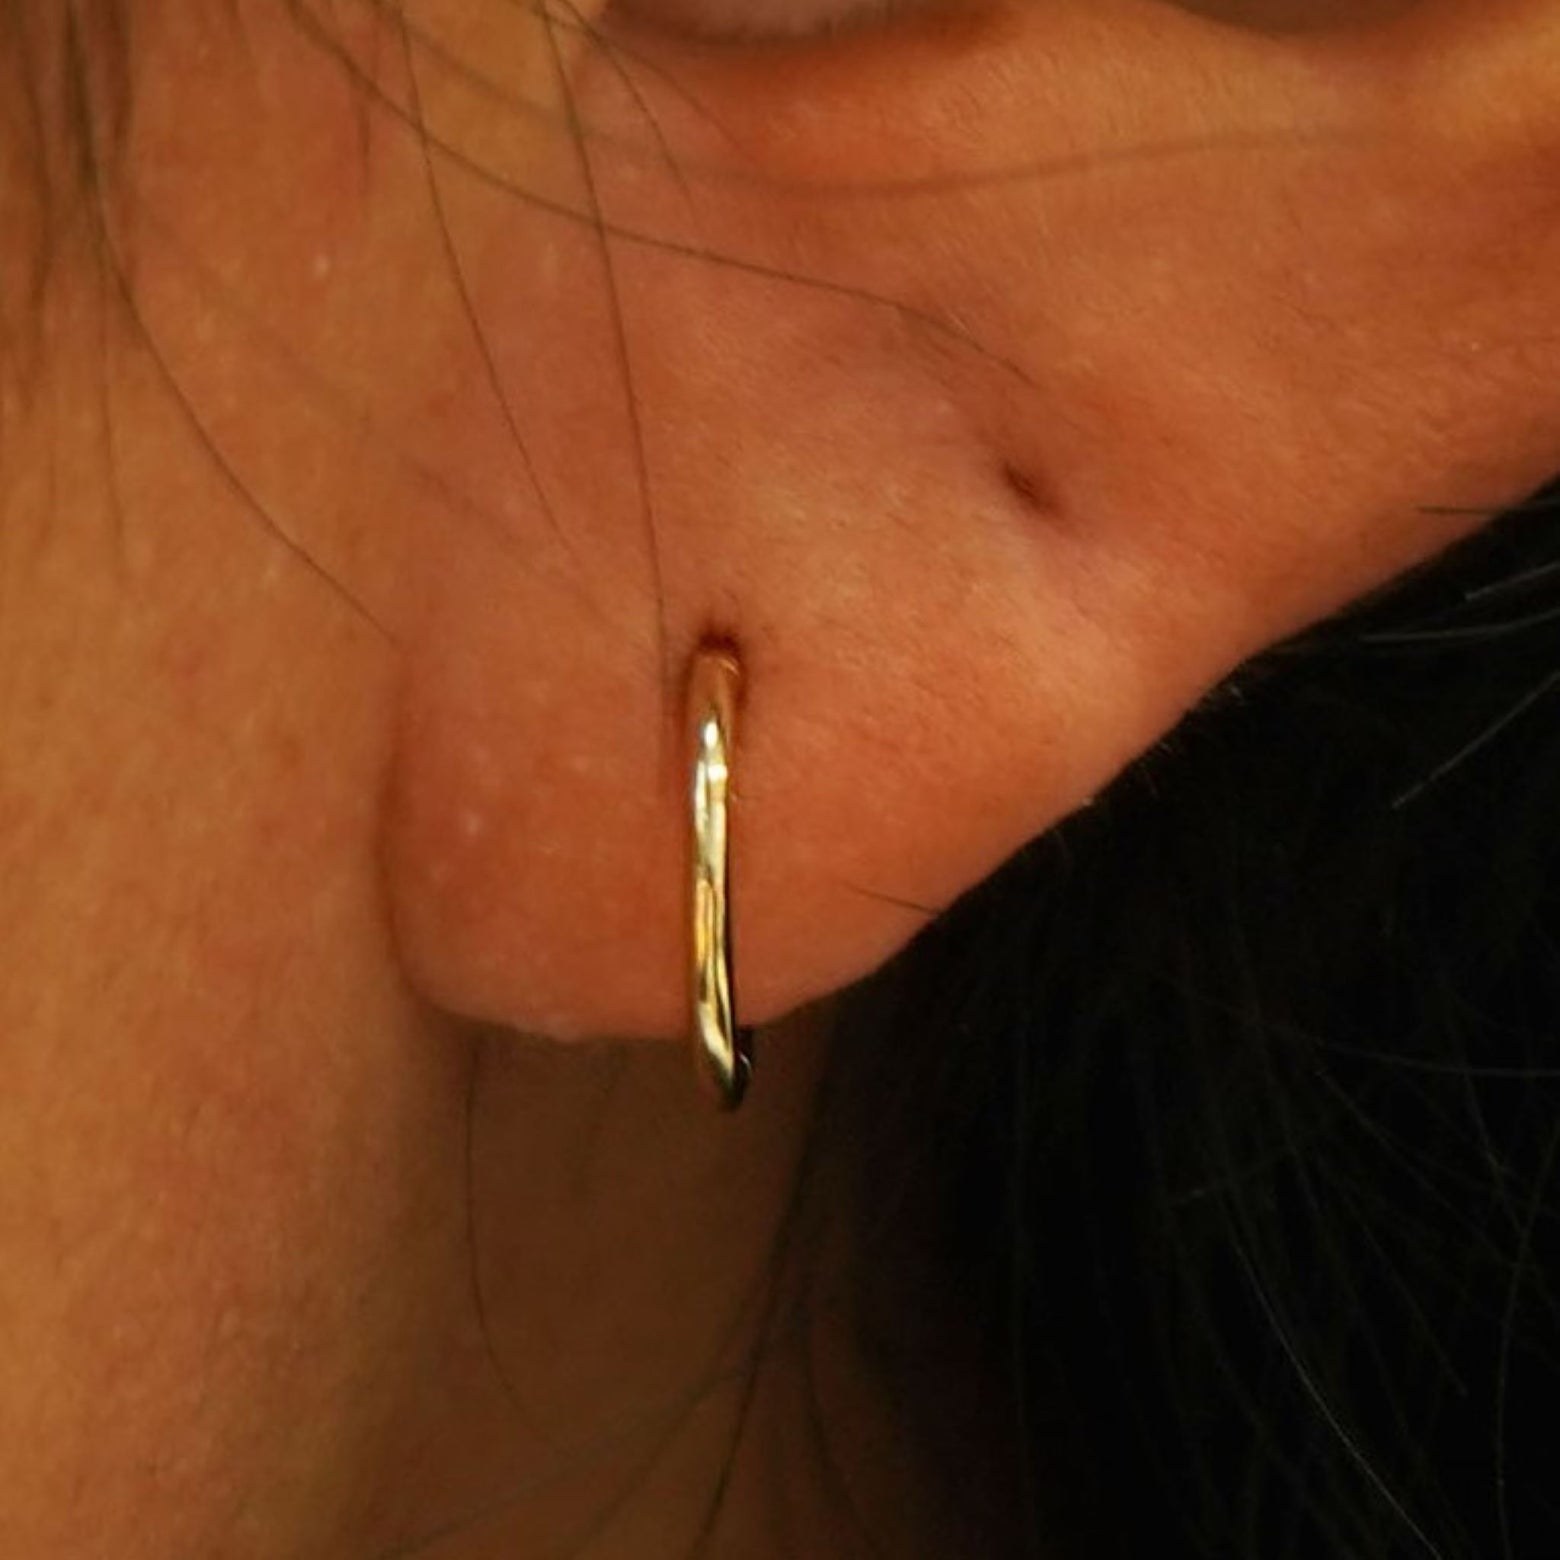 Close up view of a model's ear wearing a yellow gold Small Seamless Huggie Hoop / Piercing